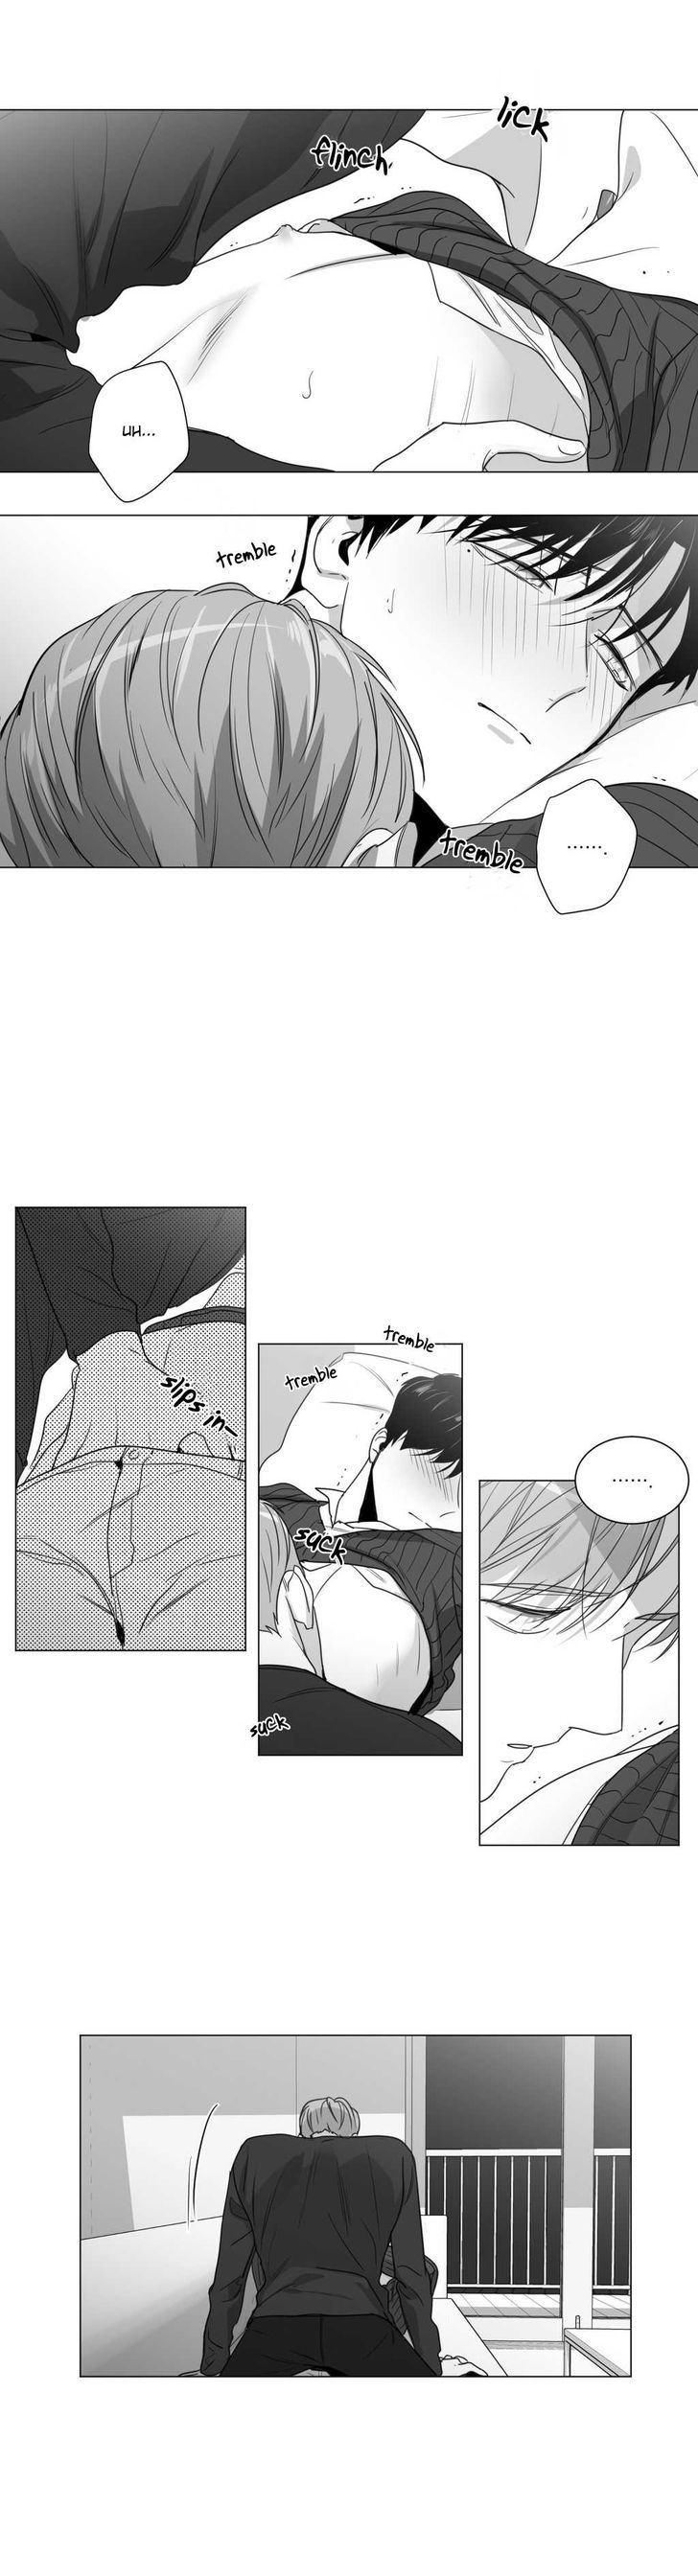 Lover Boy (Lezhin) Chapter 028 page 8